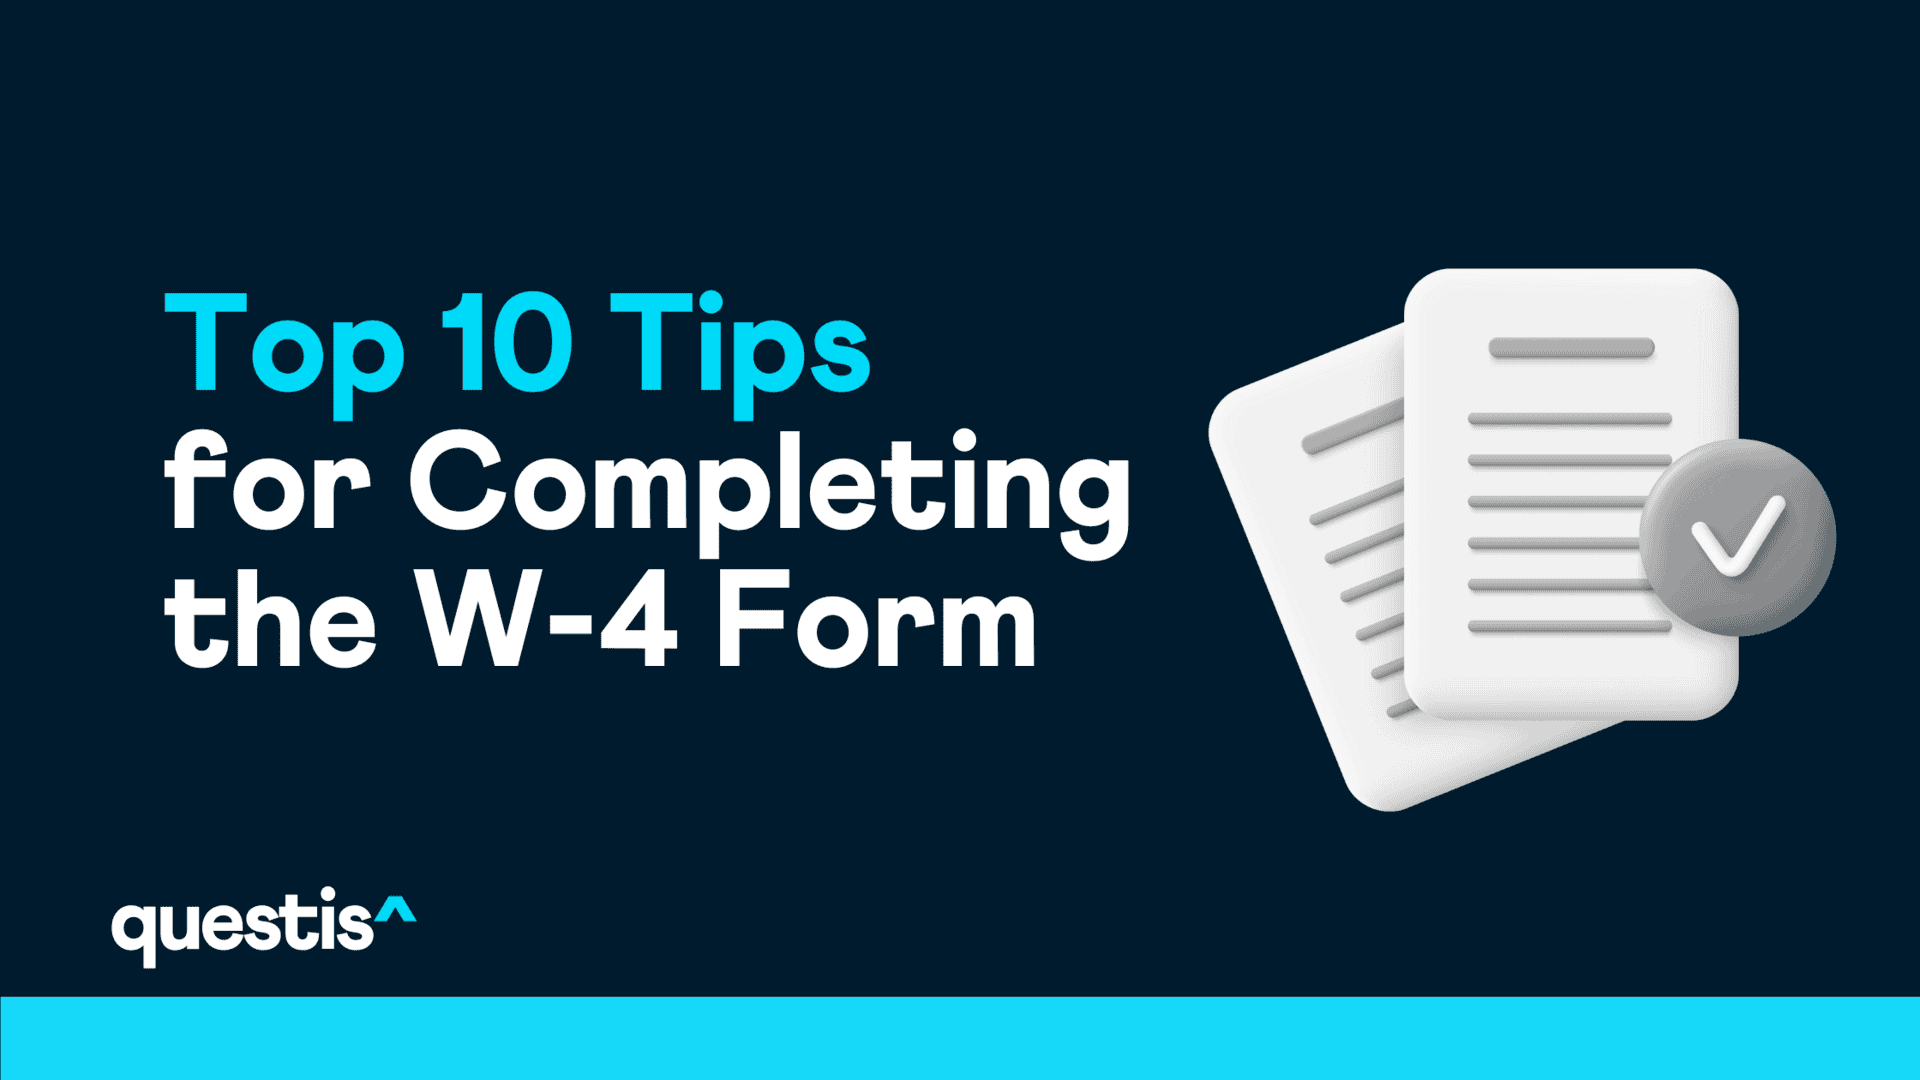 Top 10 Tips for Completing the W-4 Form